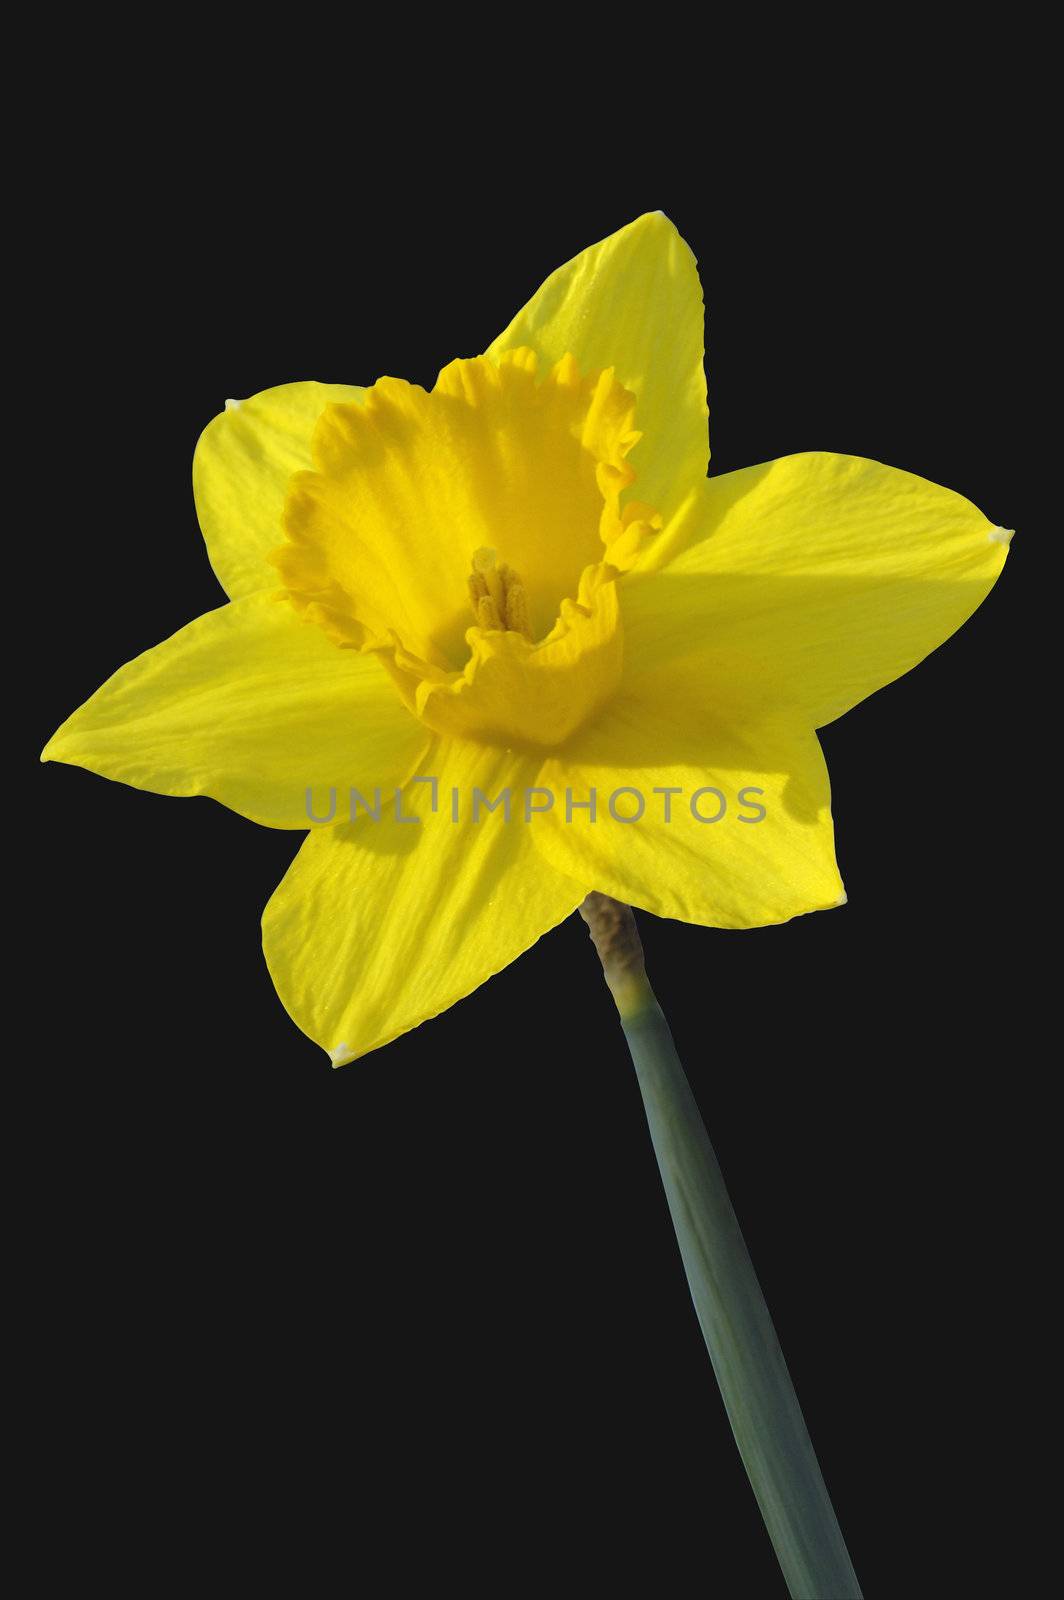 Daffodil (With clipping path) by Bateleur